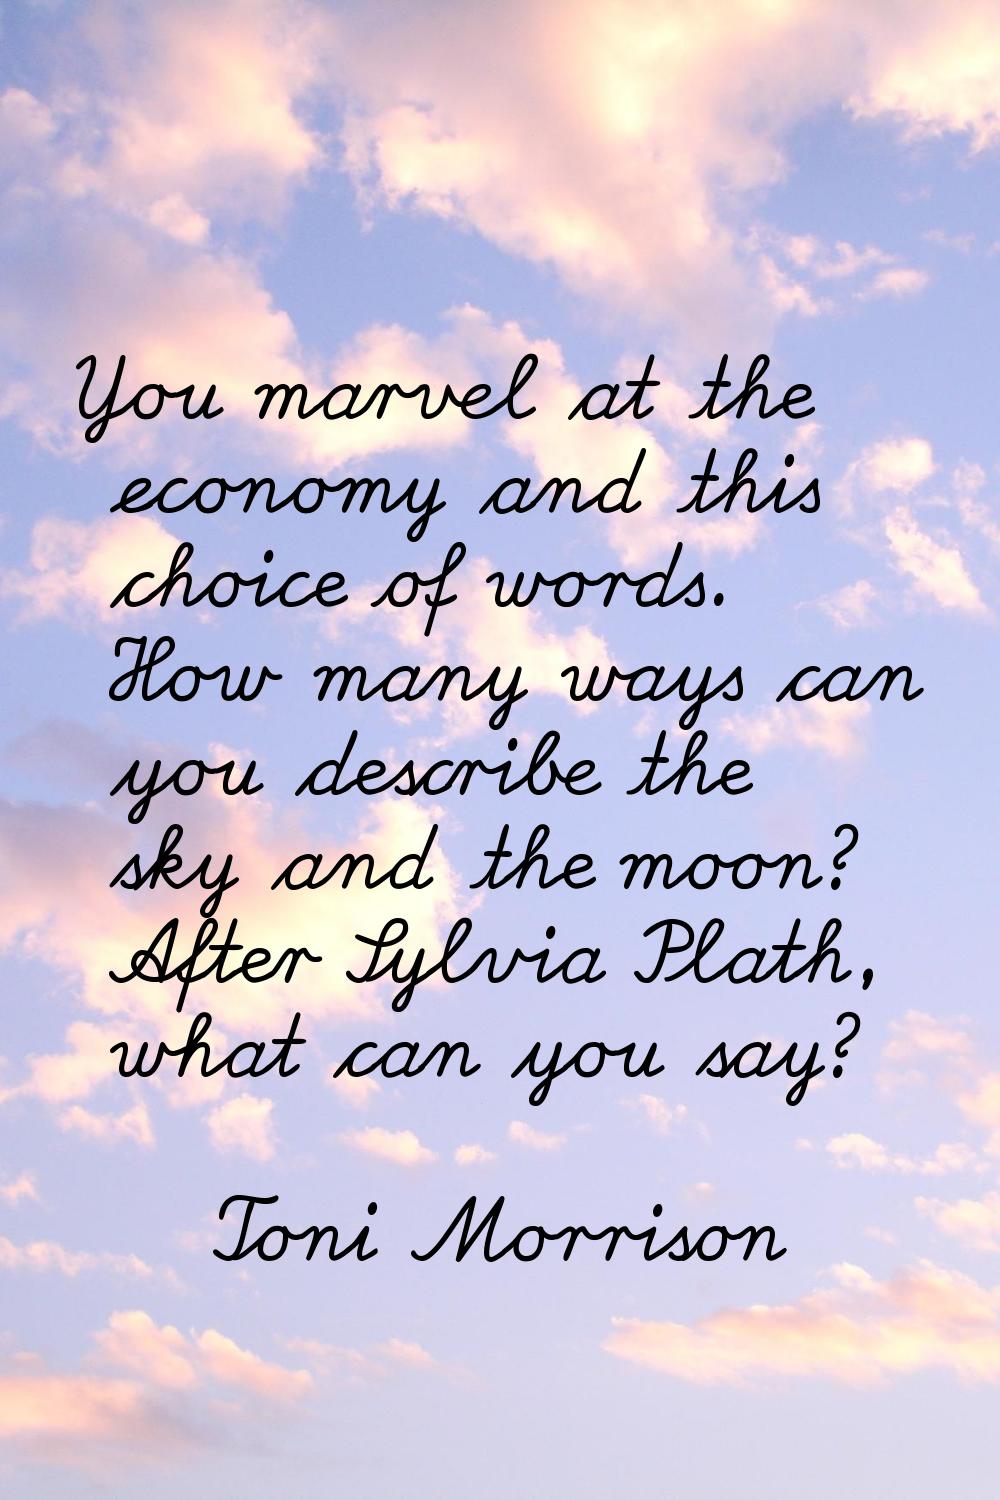 You marvel at the economy and this choice of words. How many ways can you describe the sky and the 